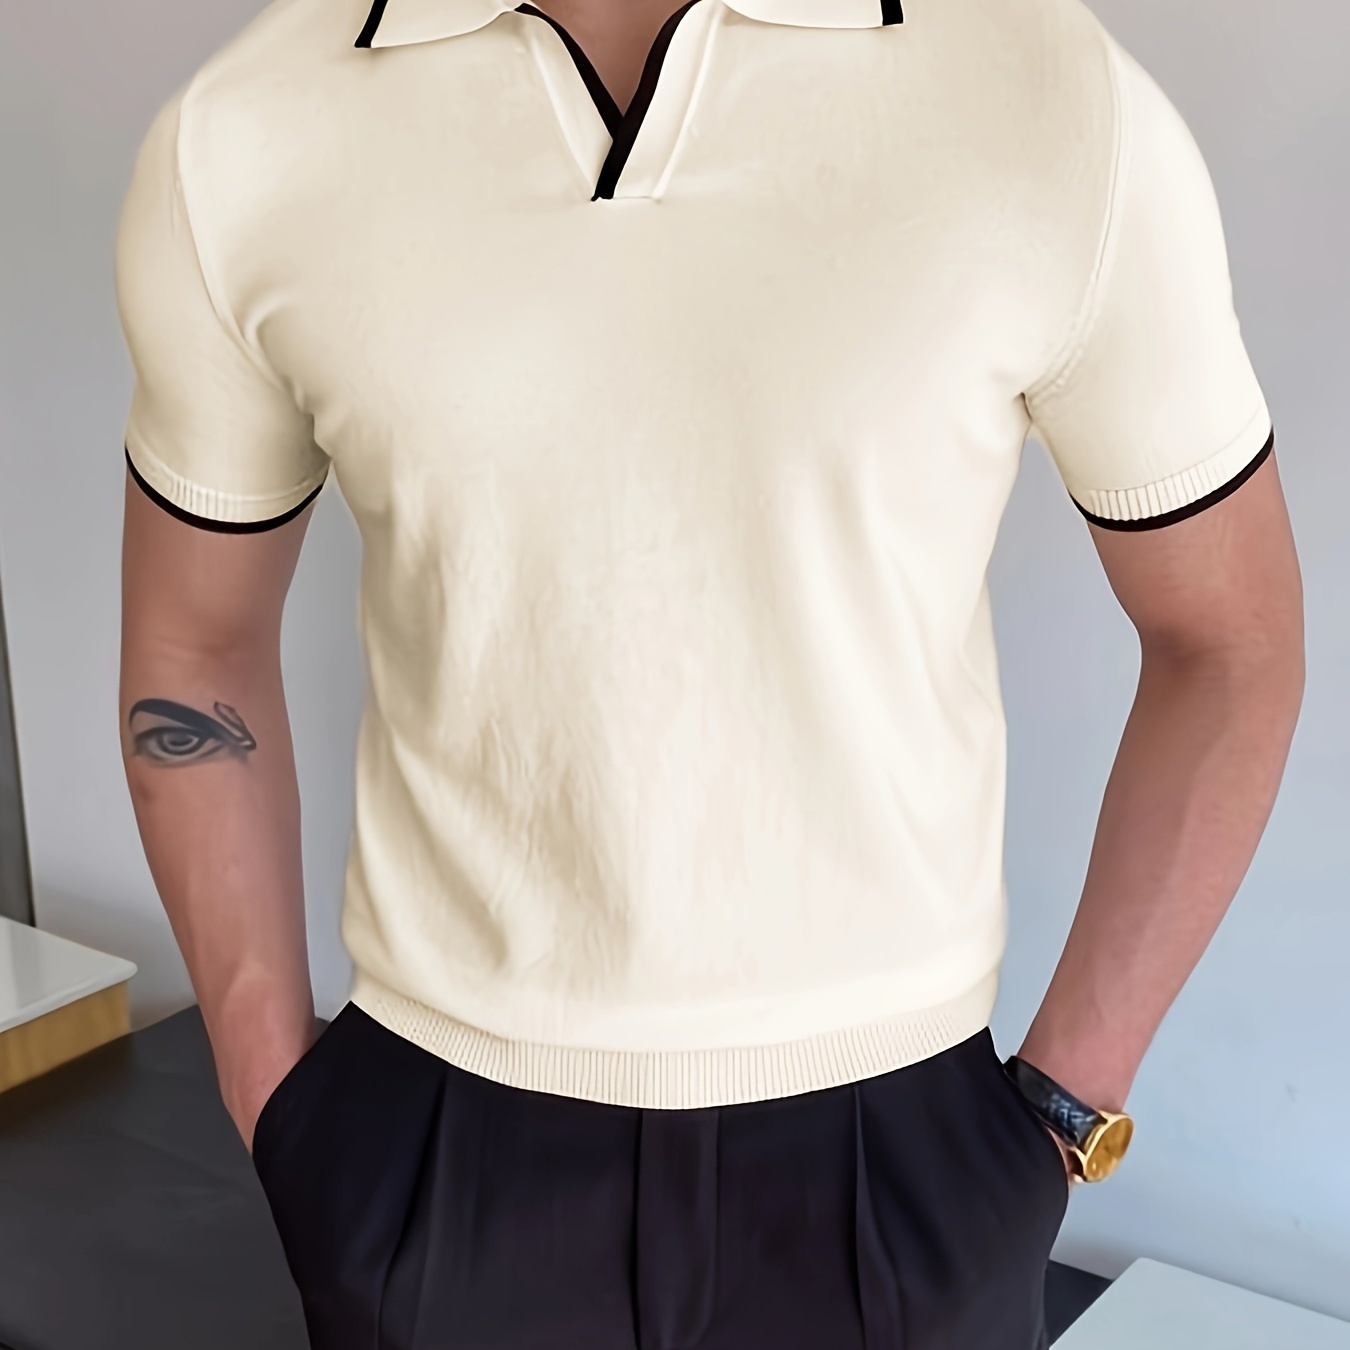 

Men's Short Sleeve V-neck Lapel Collar Henley Shirt With Contrast Color Stripe Pattern Pieces, Casual And Trendy Tops For Summer Leisurewear And Golf Wear